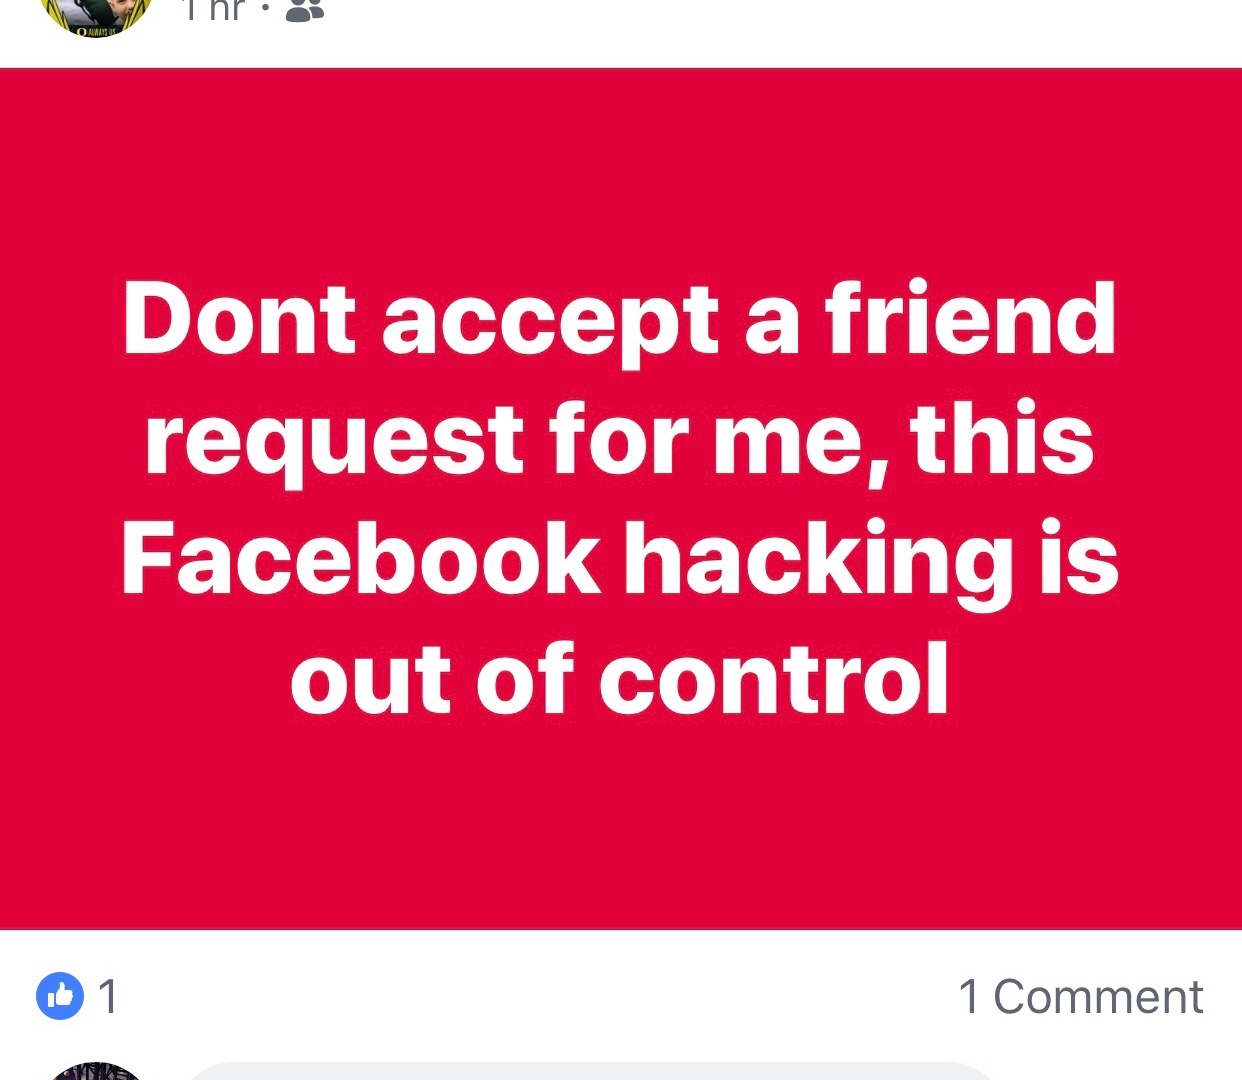 Facebook help center isn't so helpful when your account is hacked.